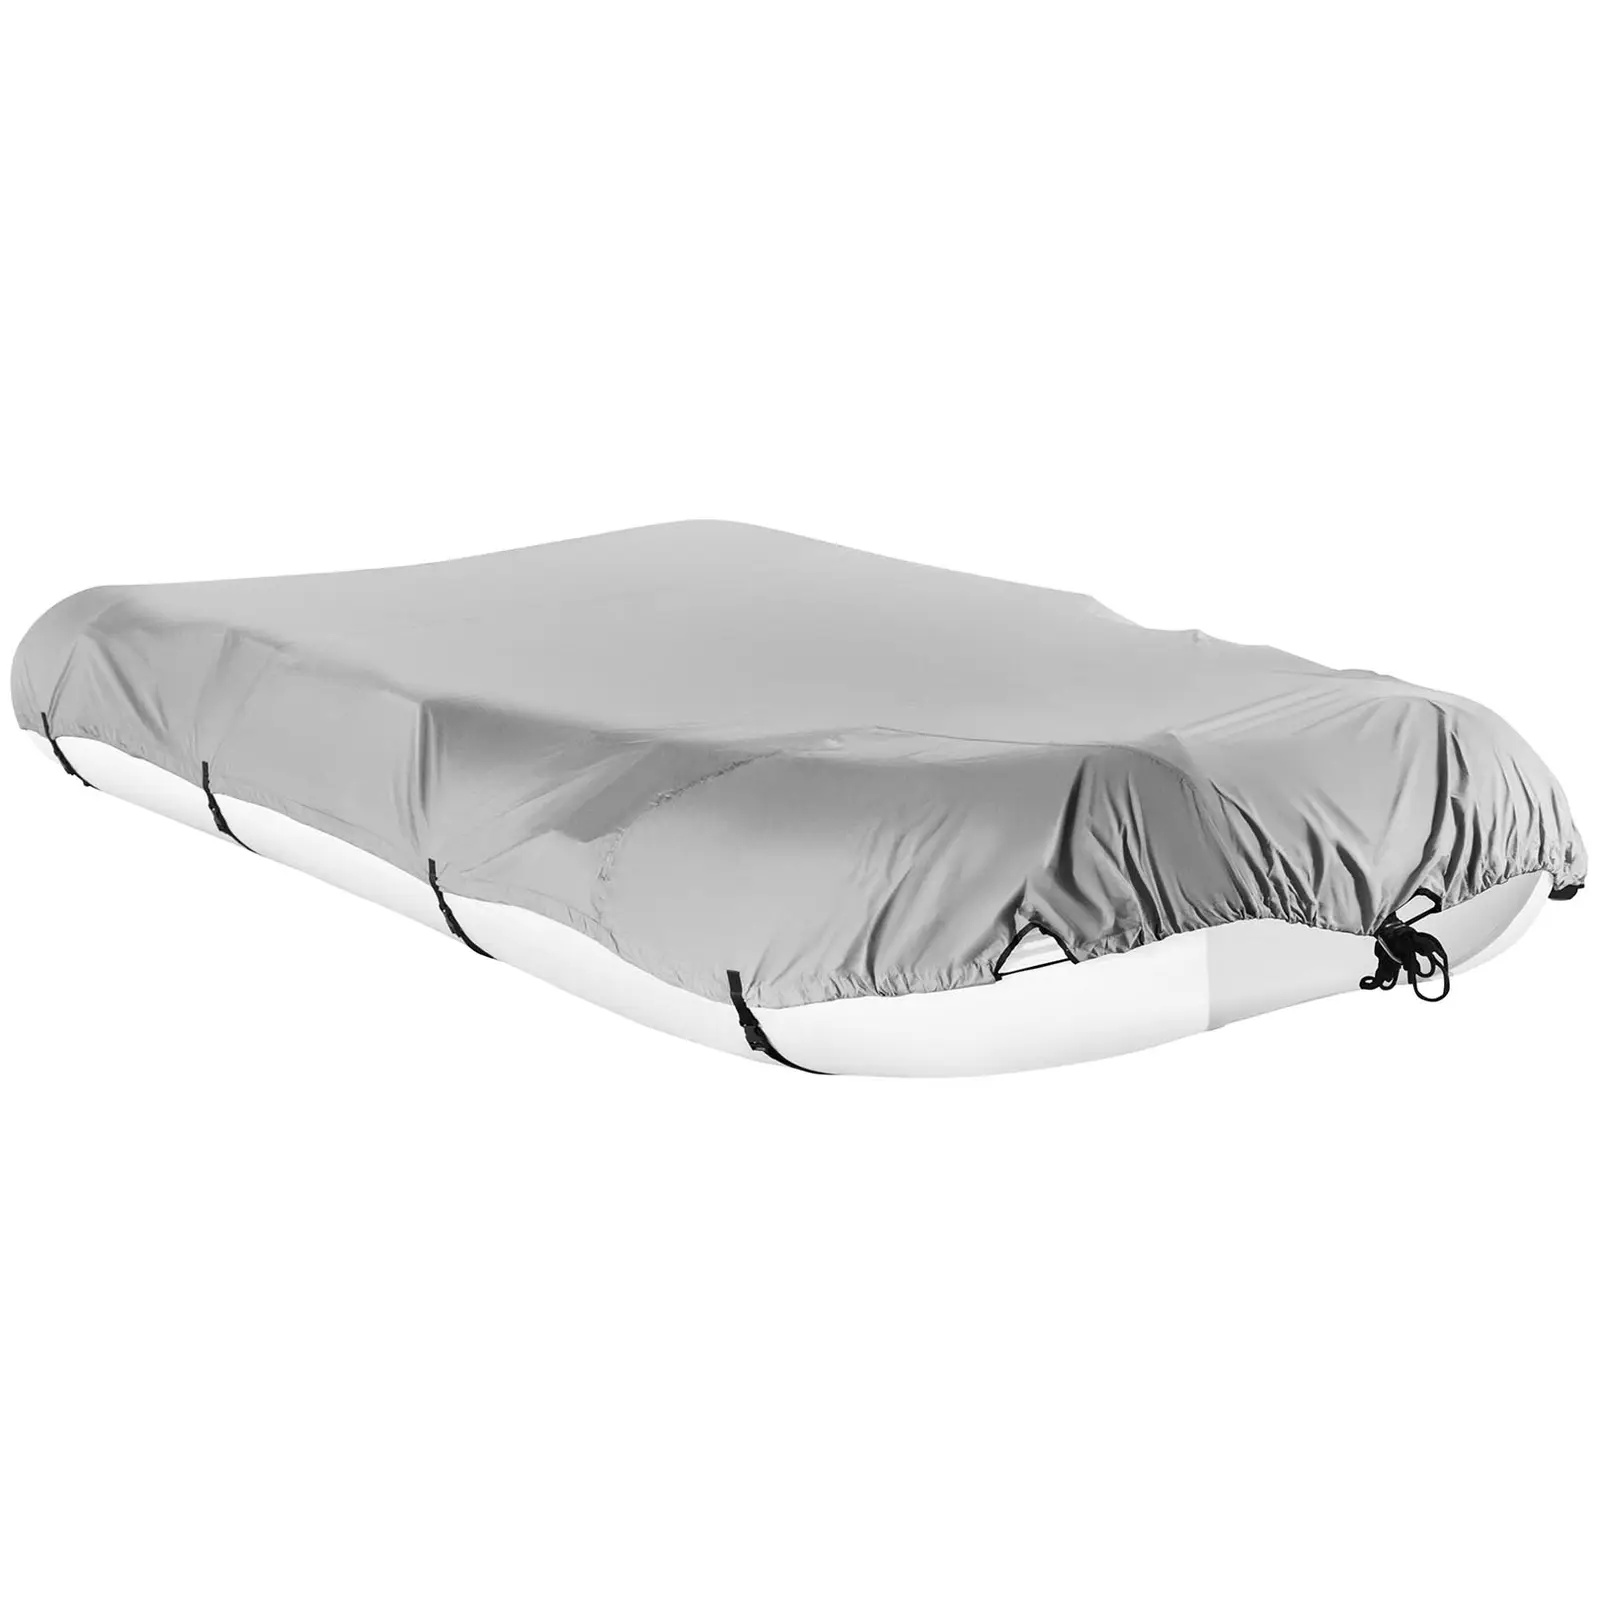 Inflatable Boat Cover - 390 x 200 x 40 cm